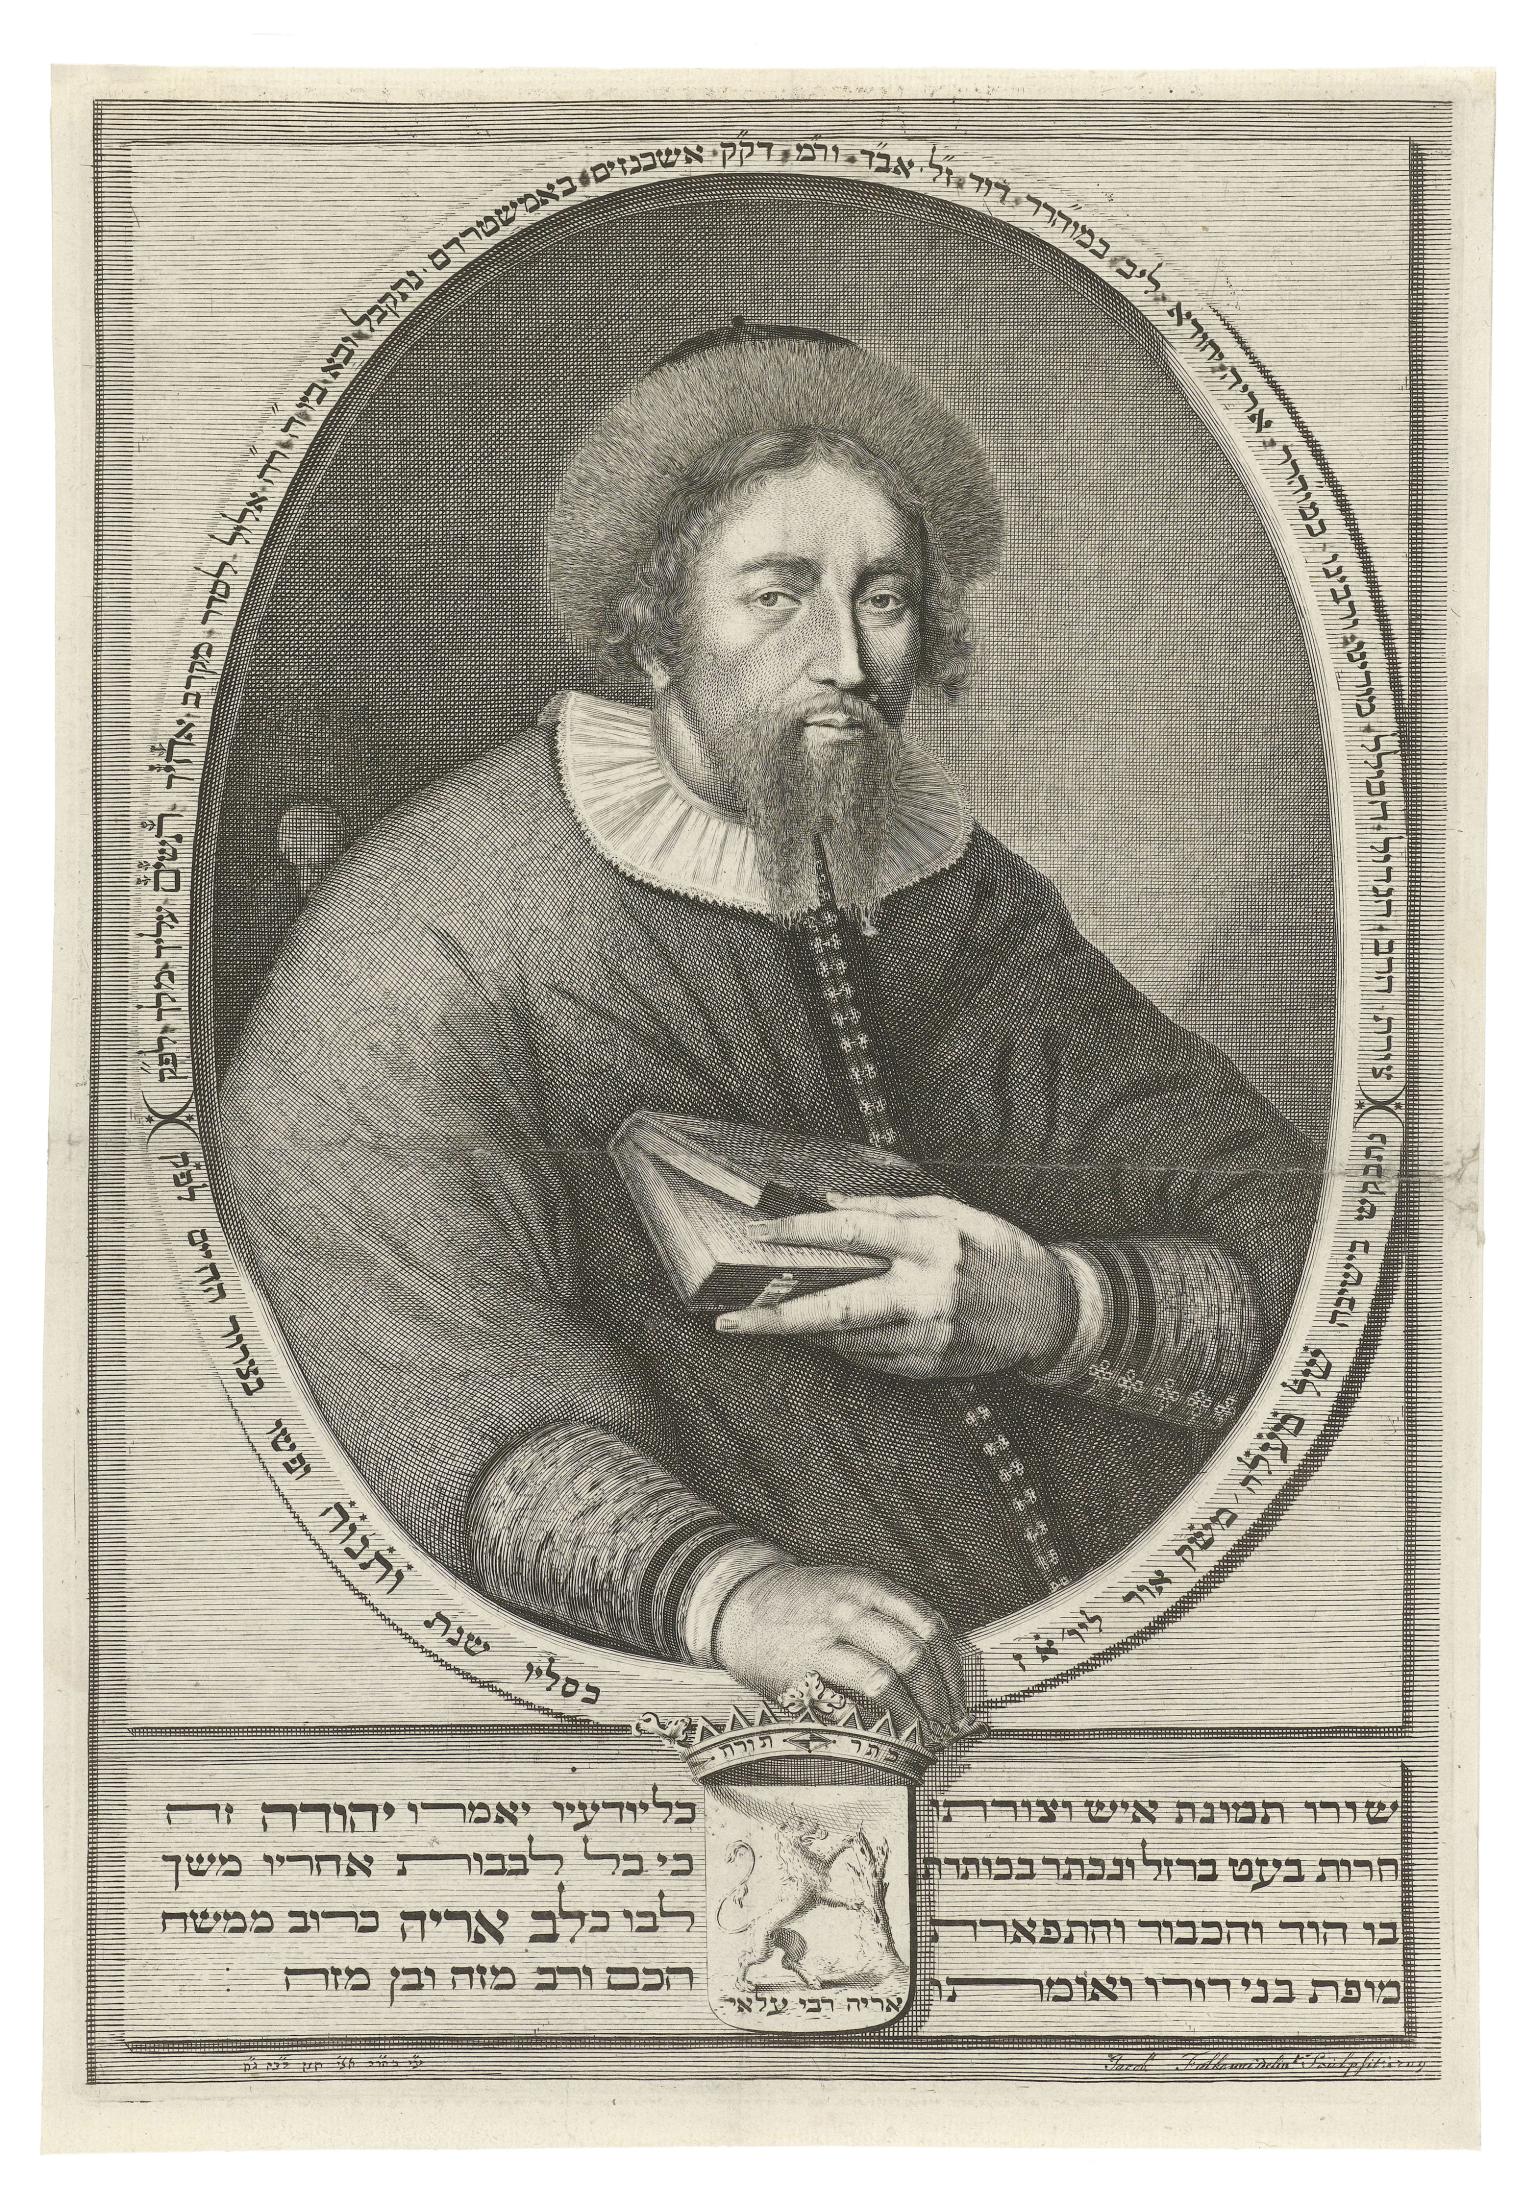 Print portrait of man holding book and framed by Hebrew text in a circle and Hebrew text below.